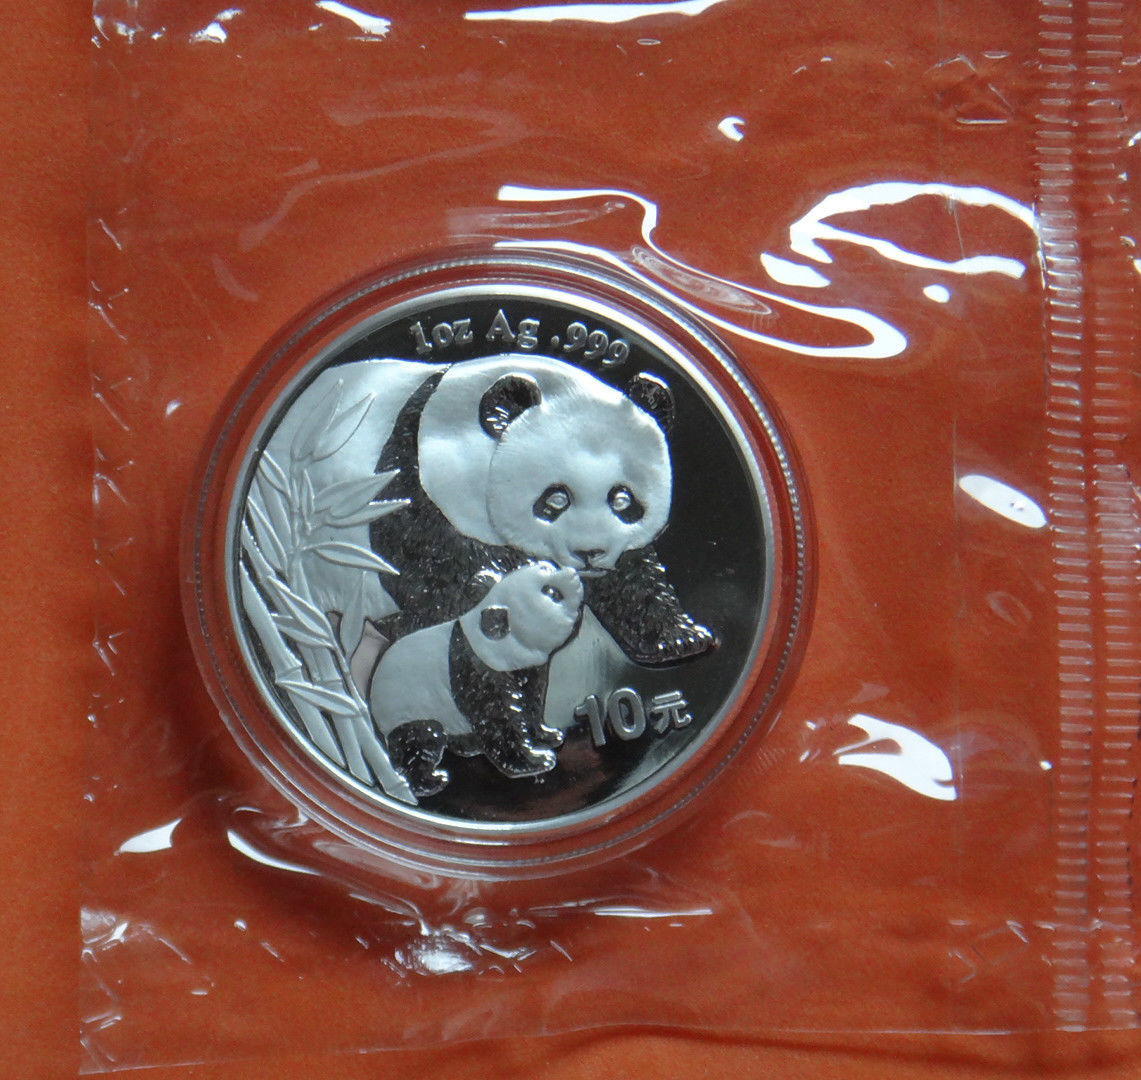 Primary image for CHINA 10 YUAN PANDA 1 OZ SILVER COIN 2004 DOUBLE SEALED NO RESERVE RARE